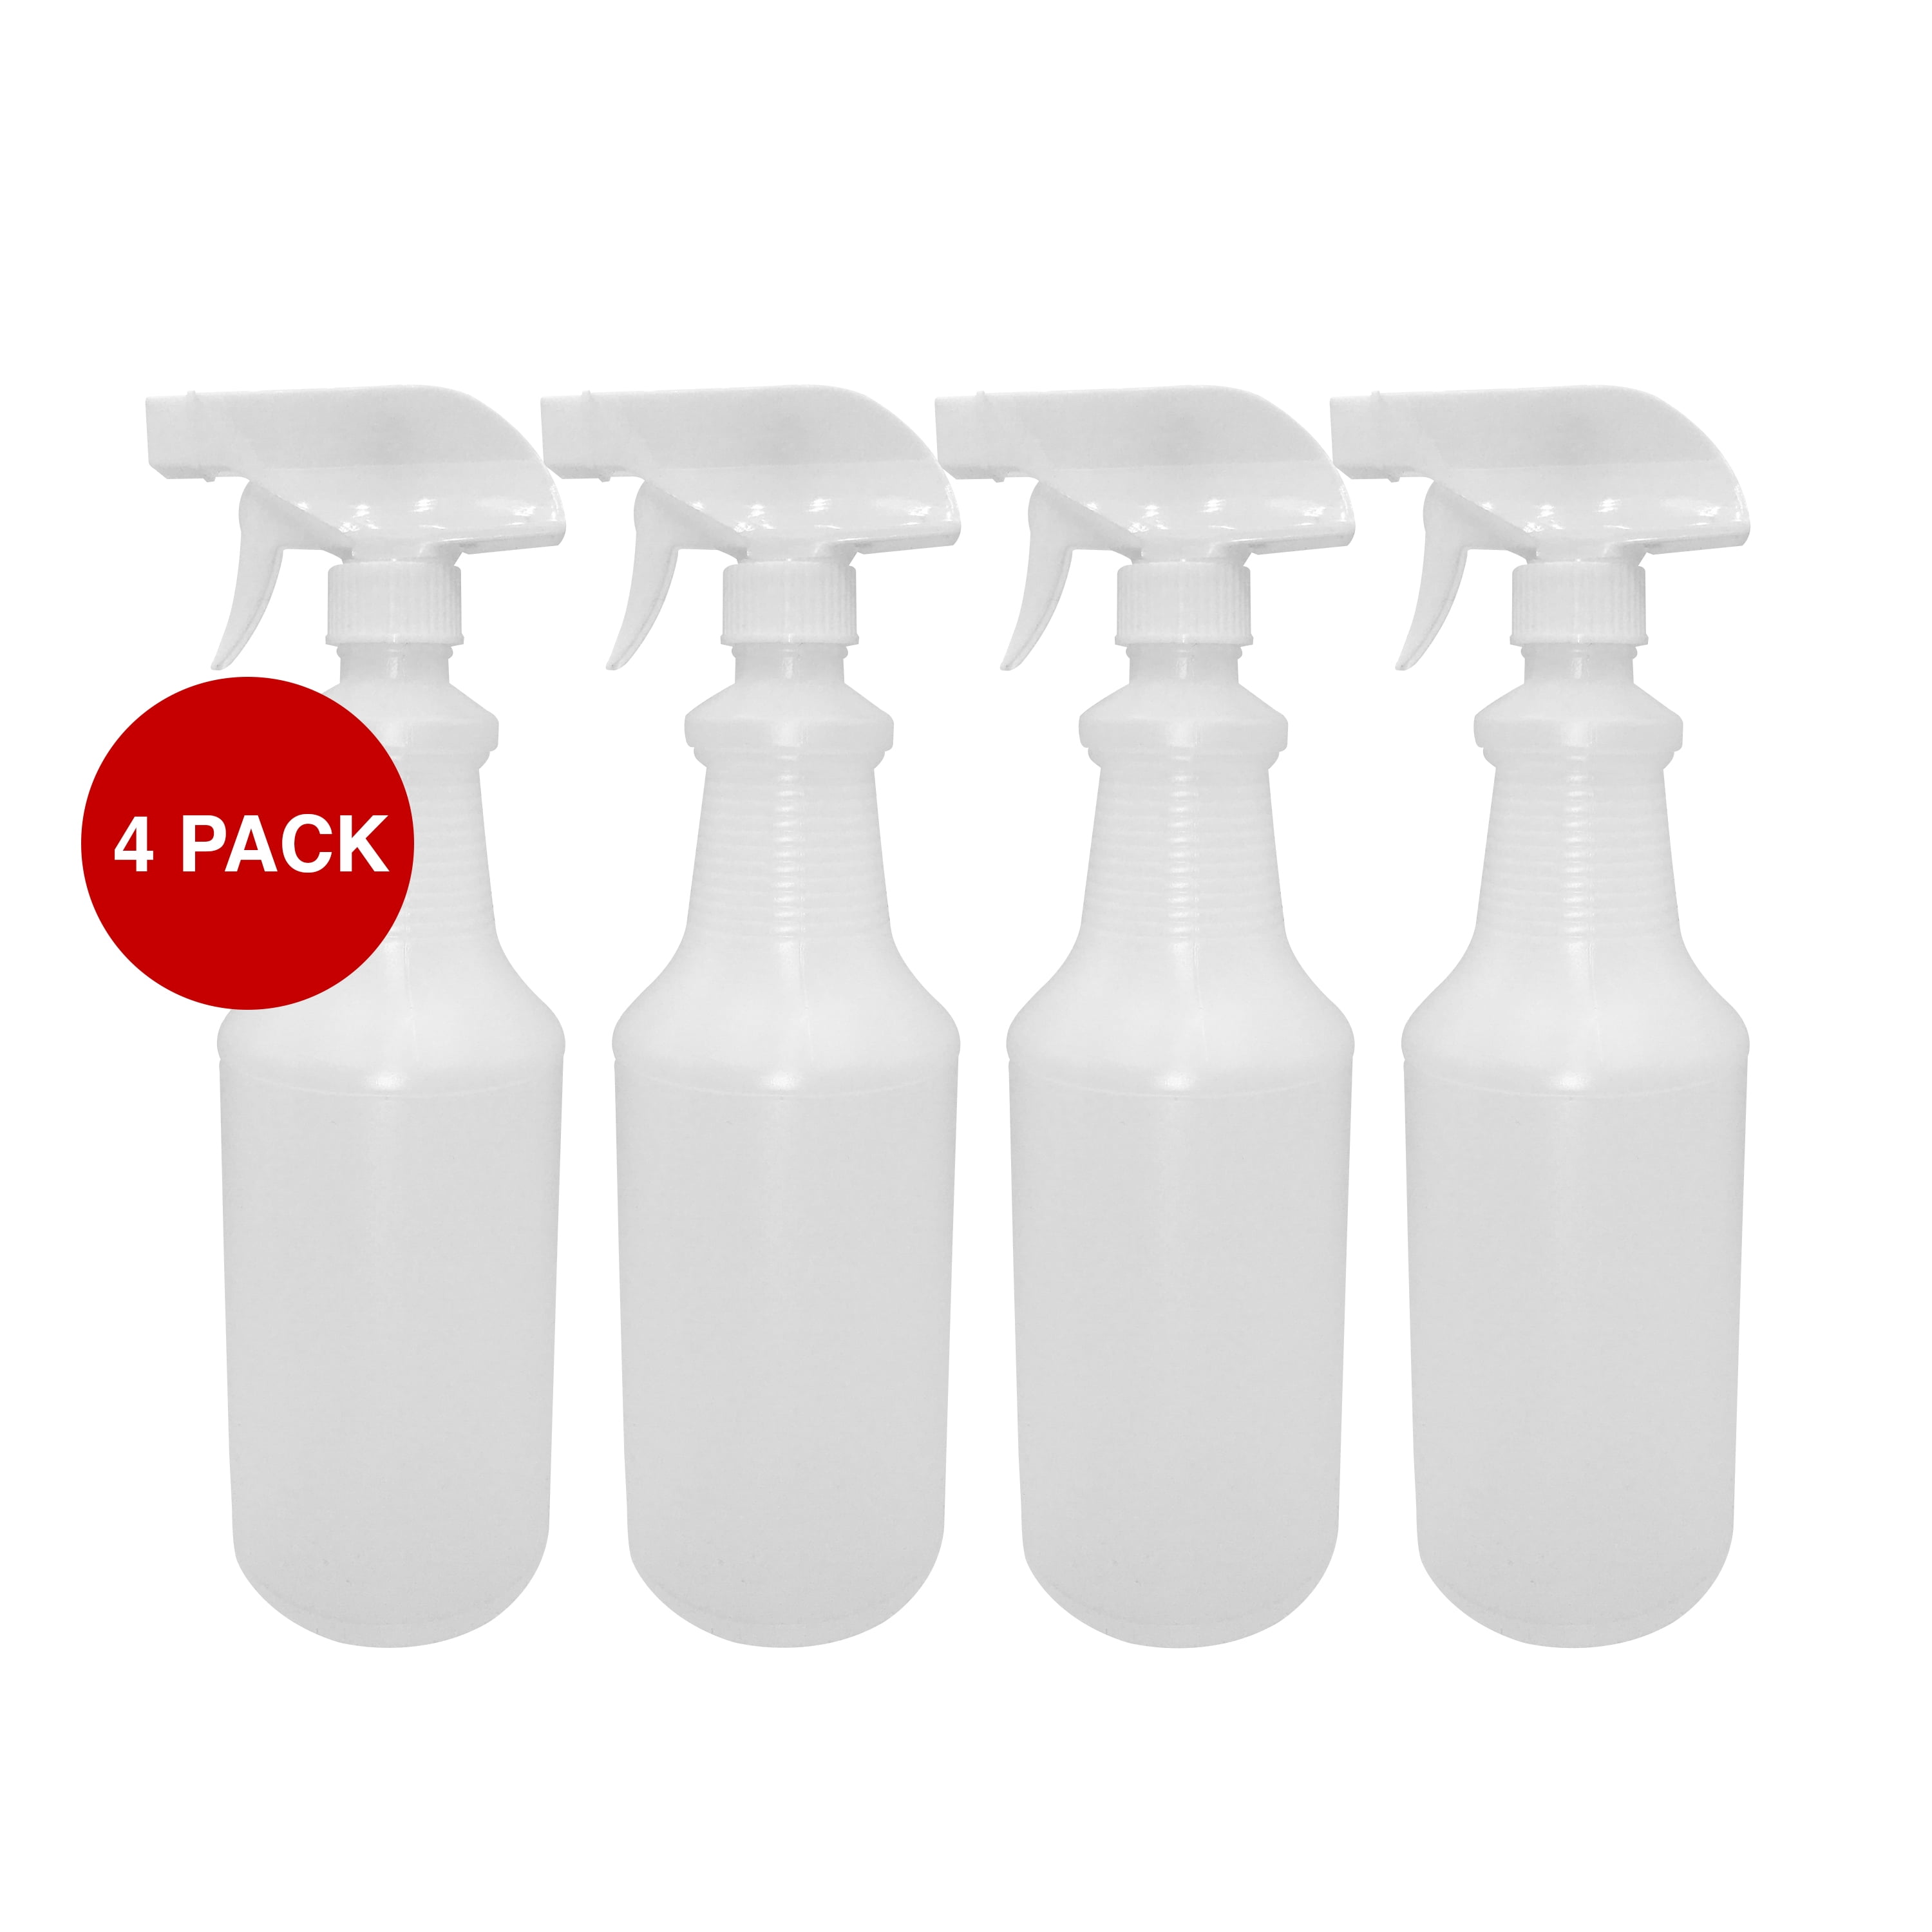 High Output, Leak Proof 32oz Spray Bottle 3 Pack - Spray Heads Included.  Clear, Heavy Duty 32 Oz Plastic Sprayers for Mixed Chemicals, Bleach and